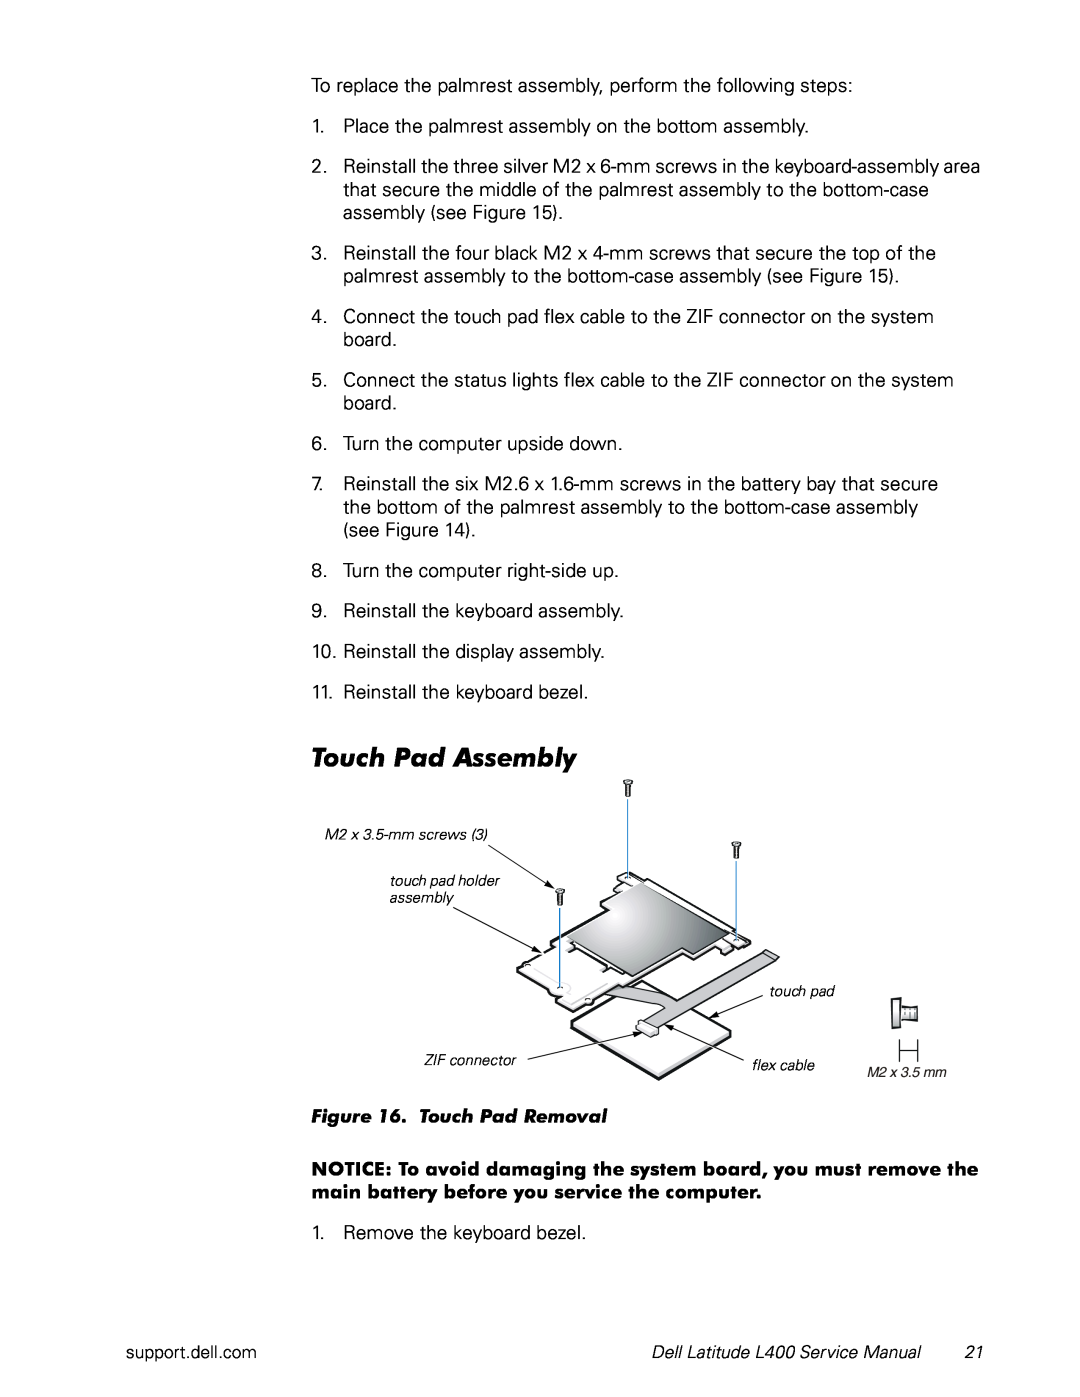 Dell L400 service manual Touch Pad Assembly, Touch Pad Removal 